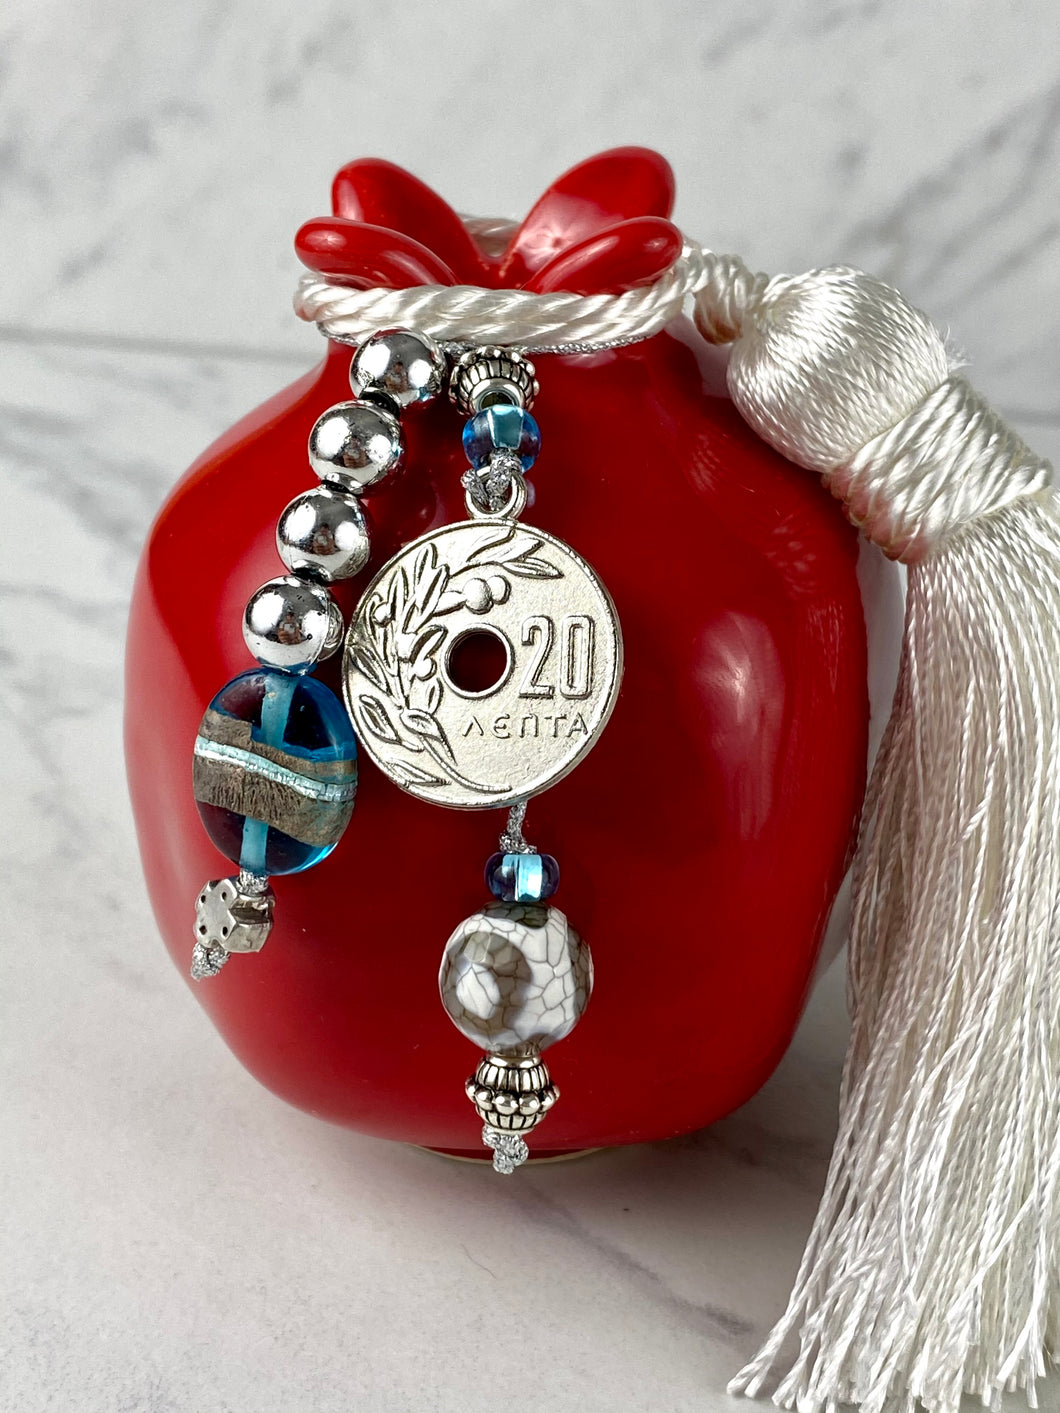 Med Pomegranate with 20 Lepta coin, Murano glass beads with tassel